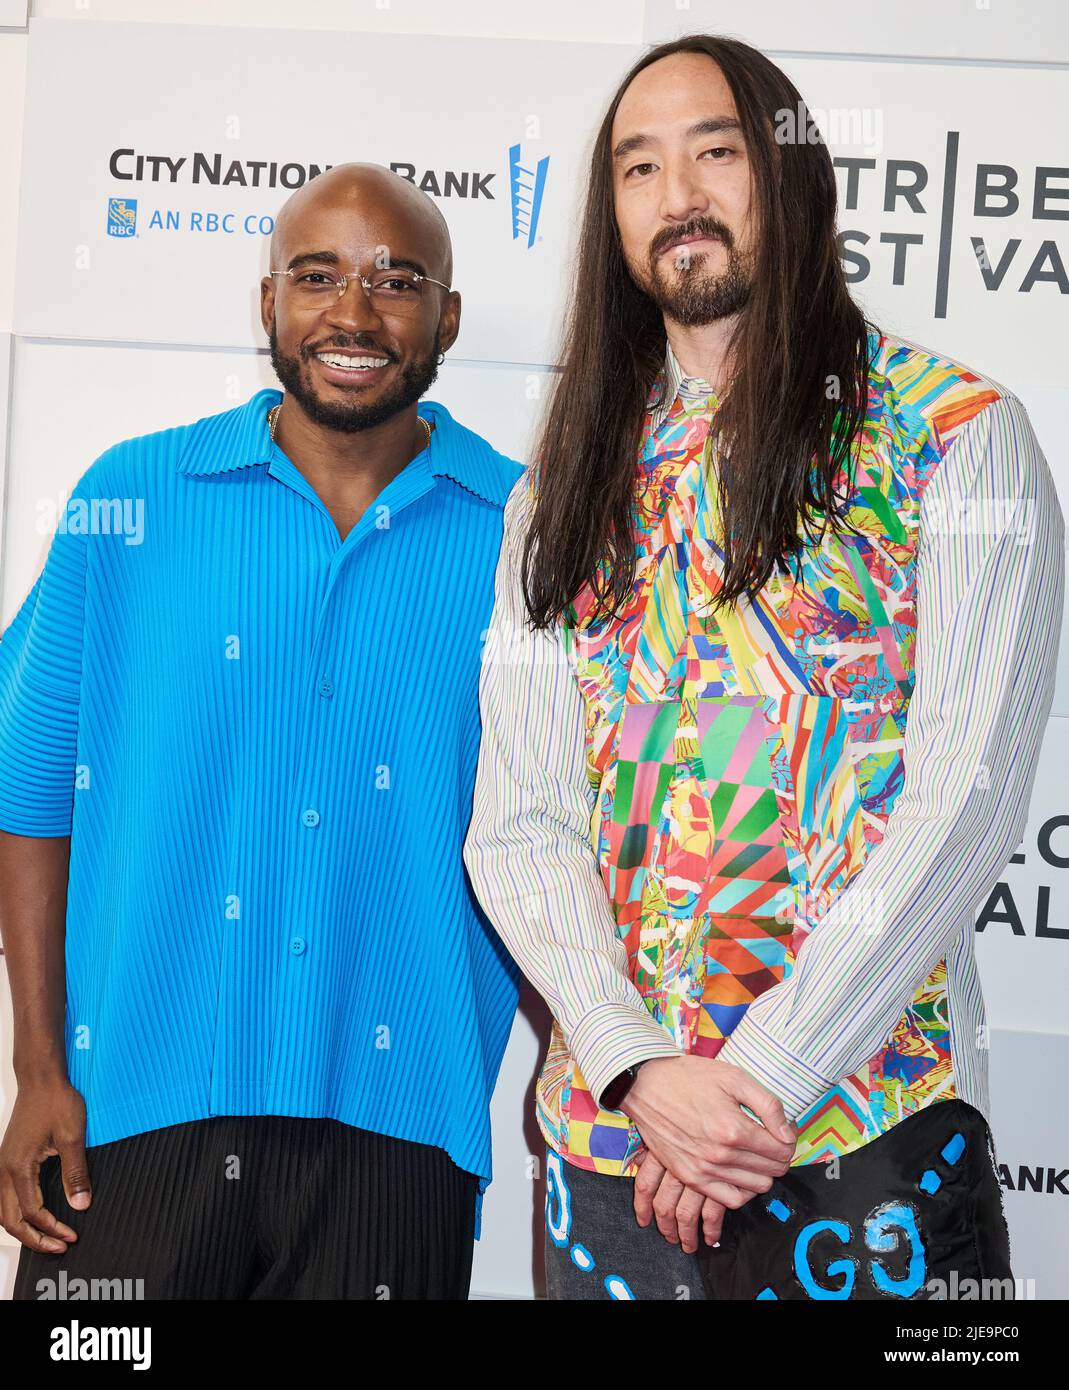 NEW YORK, NY, USA - JUNE 13, 2022: Jacques Morel and Steve Aoki attend the Tribeca Festival 'Storytellers - Steve Aoki with Jacques Morel'. Stock Photo